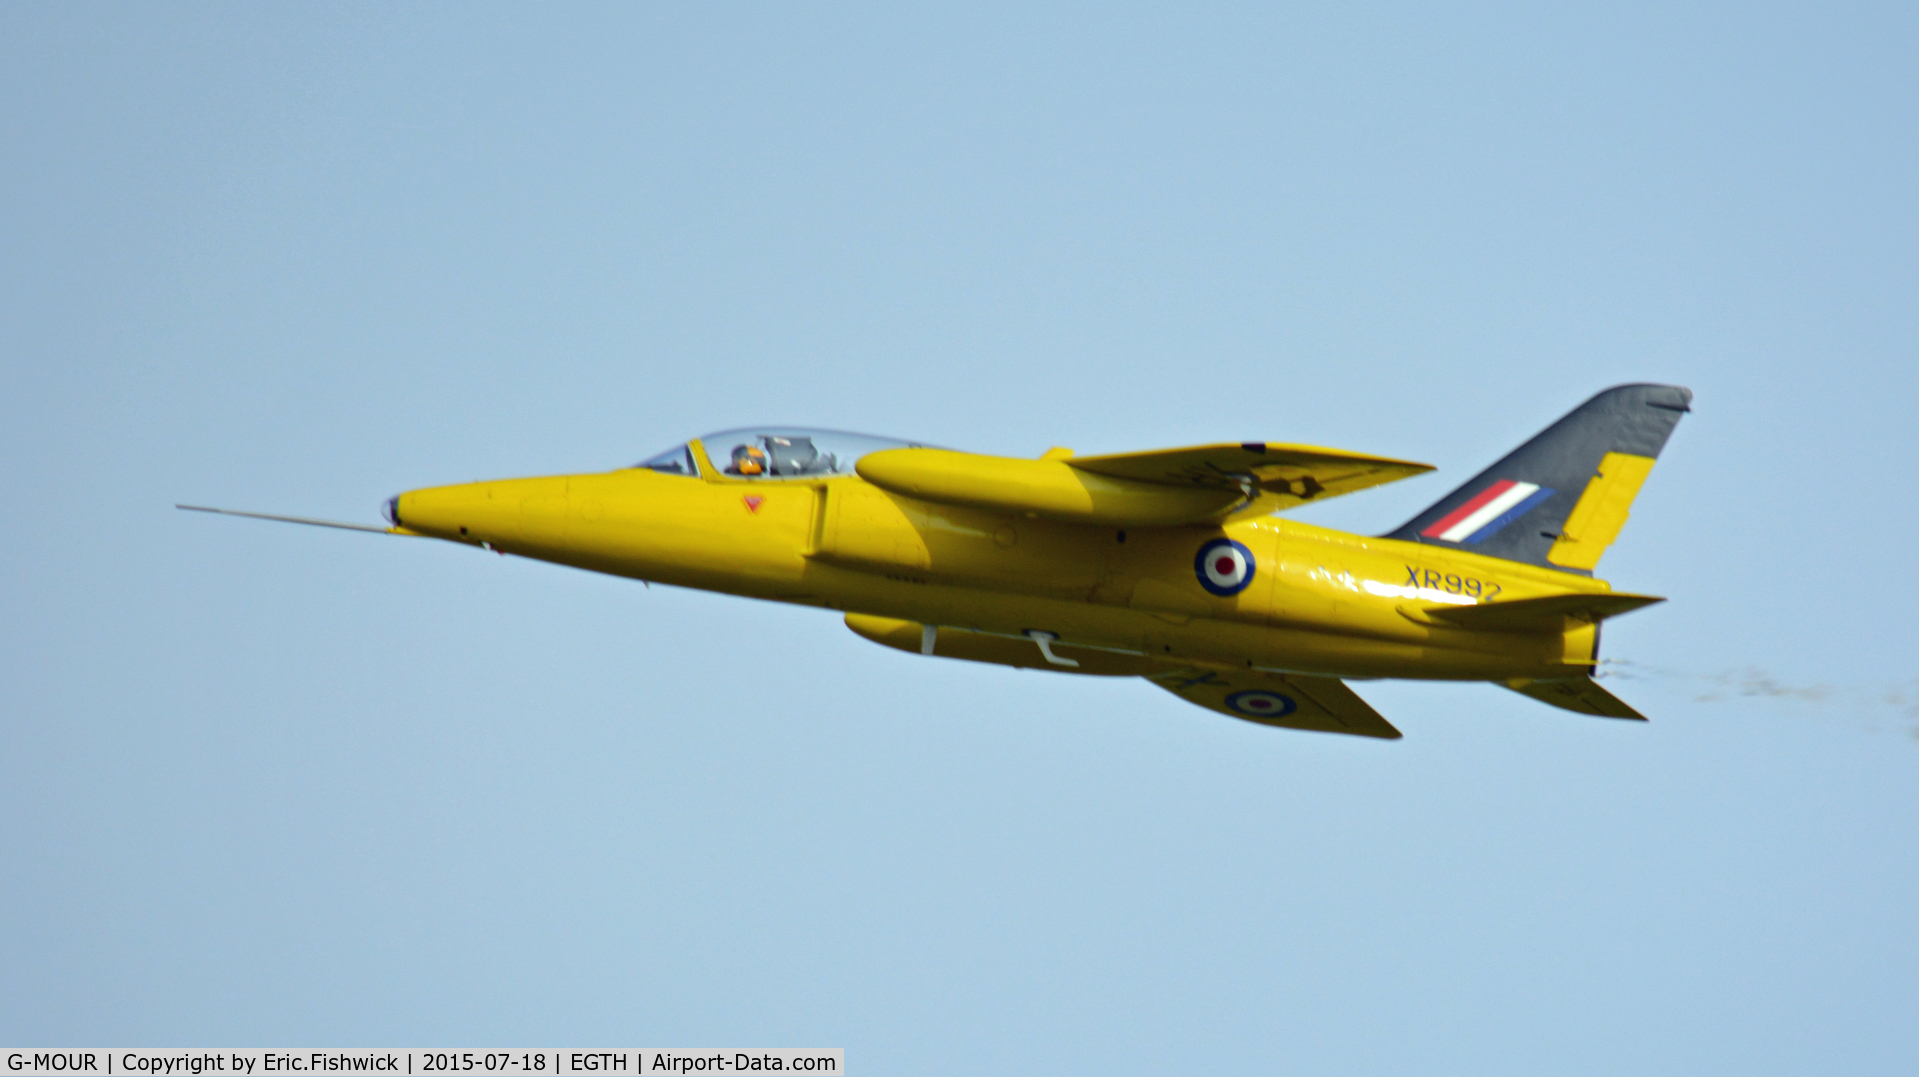 G-MOUR, 1964 Hawker Siddeley Gnat T.1 C/N FL596, 41. G-MOUR in display mode at Shuttleworth Best of British Airshow, July 2015